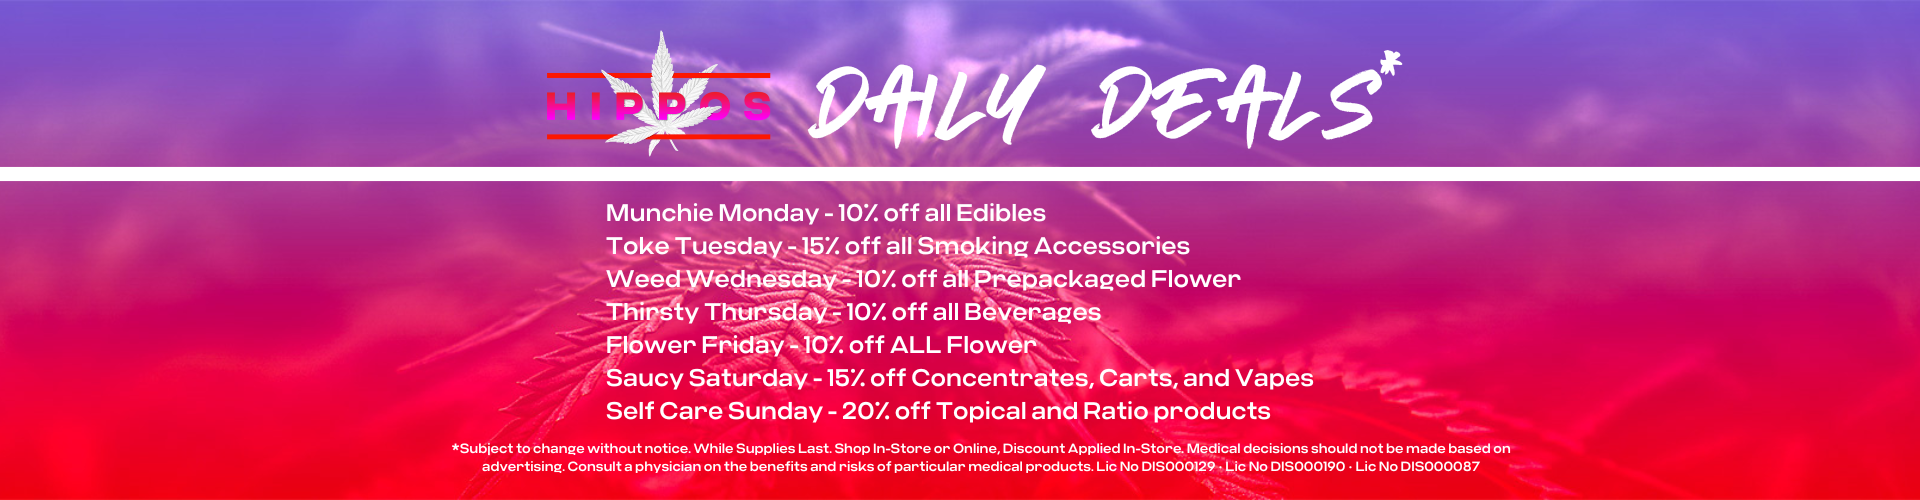 Hippos Daily Deals Munchie Monday - 10% off all Edibles Toke Tuesday - 15% off all Smoking Accessories Weed Wednesday - 10% off all Prepackaged Flower Thirsty Thursday - 10% off all Beverages Flower Friday - 10% off ALL Flower Saucy Saturday - 15% off Concentrates, Carts, and Vapes Self Care Sunday - 20% off Topical and Ratio products *Subject to change without notice. While Supplies Last. Shop In-Store or Online, Discount Applied In-Store. Medical decisions should not be made based on advertising. Consult a physician on the benefits and risks of particular medical products. Lic No DIS000129